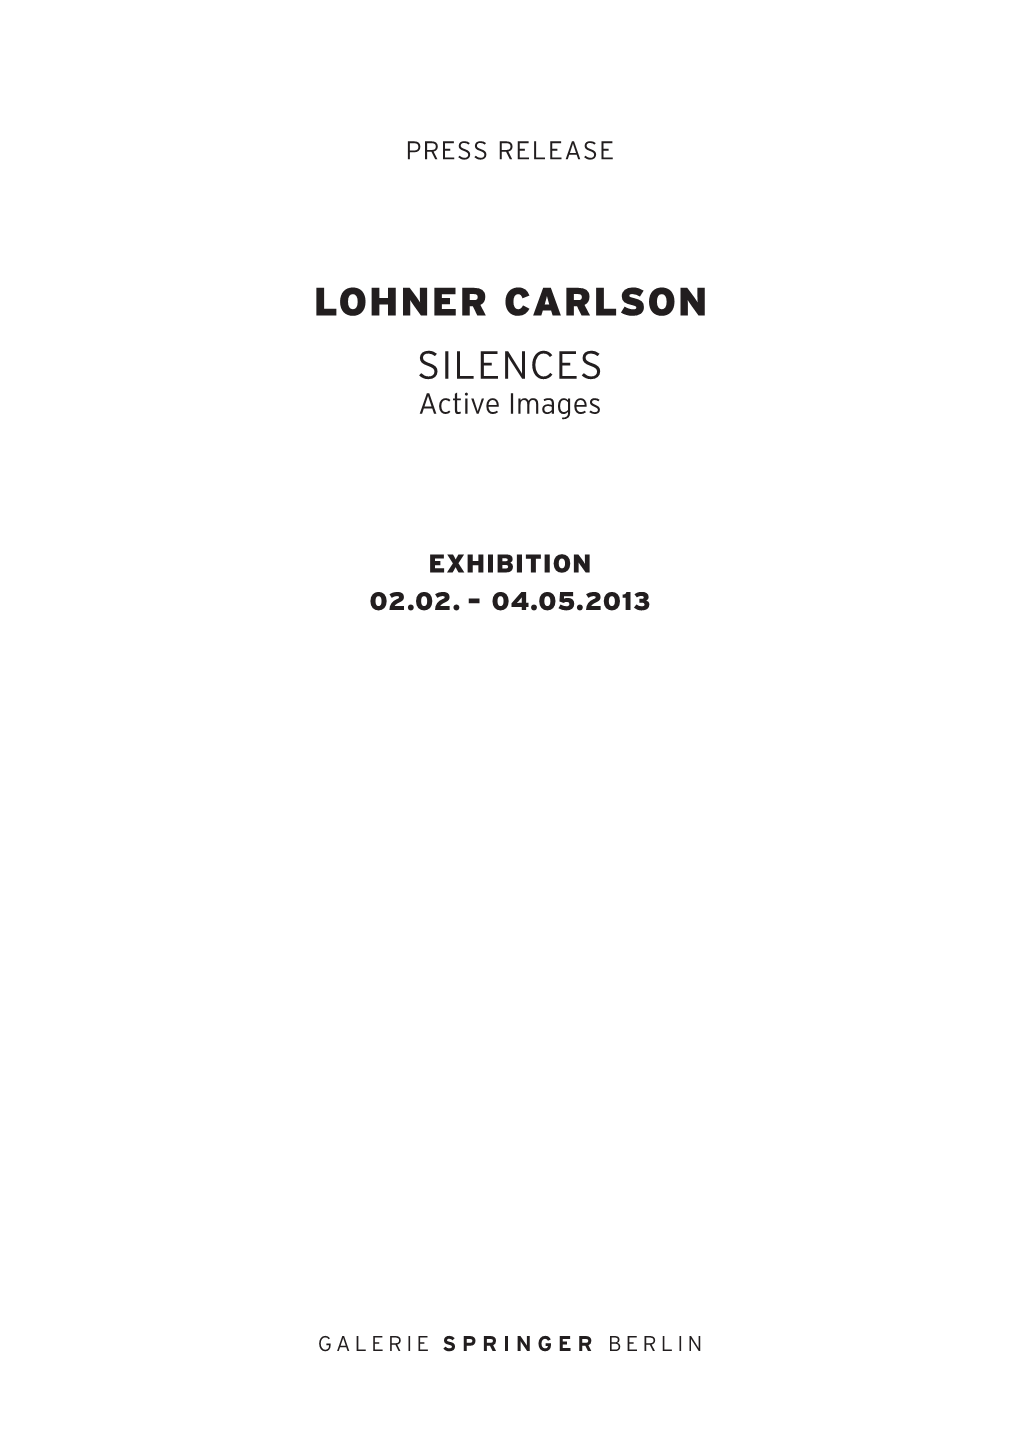 Lohner Carlson Silences Active Images